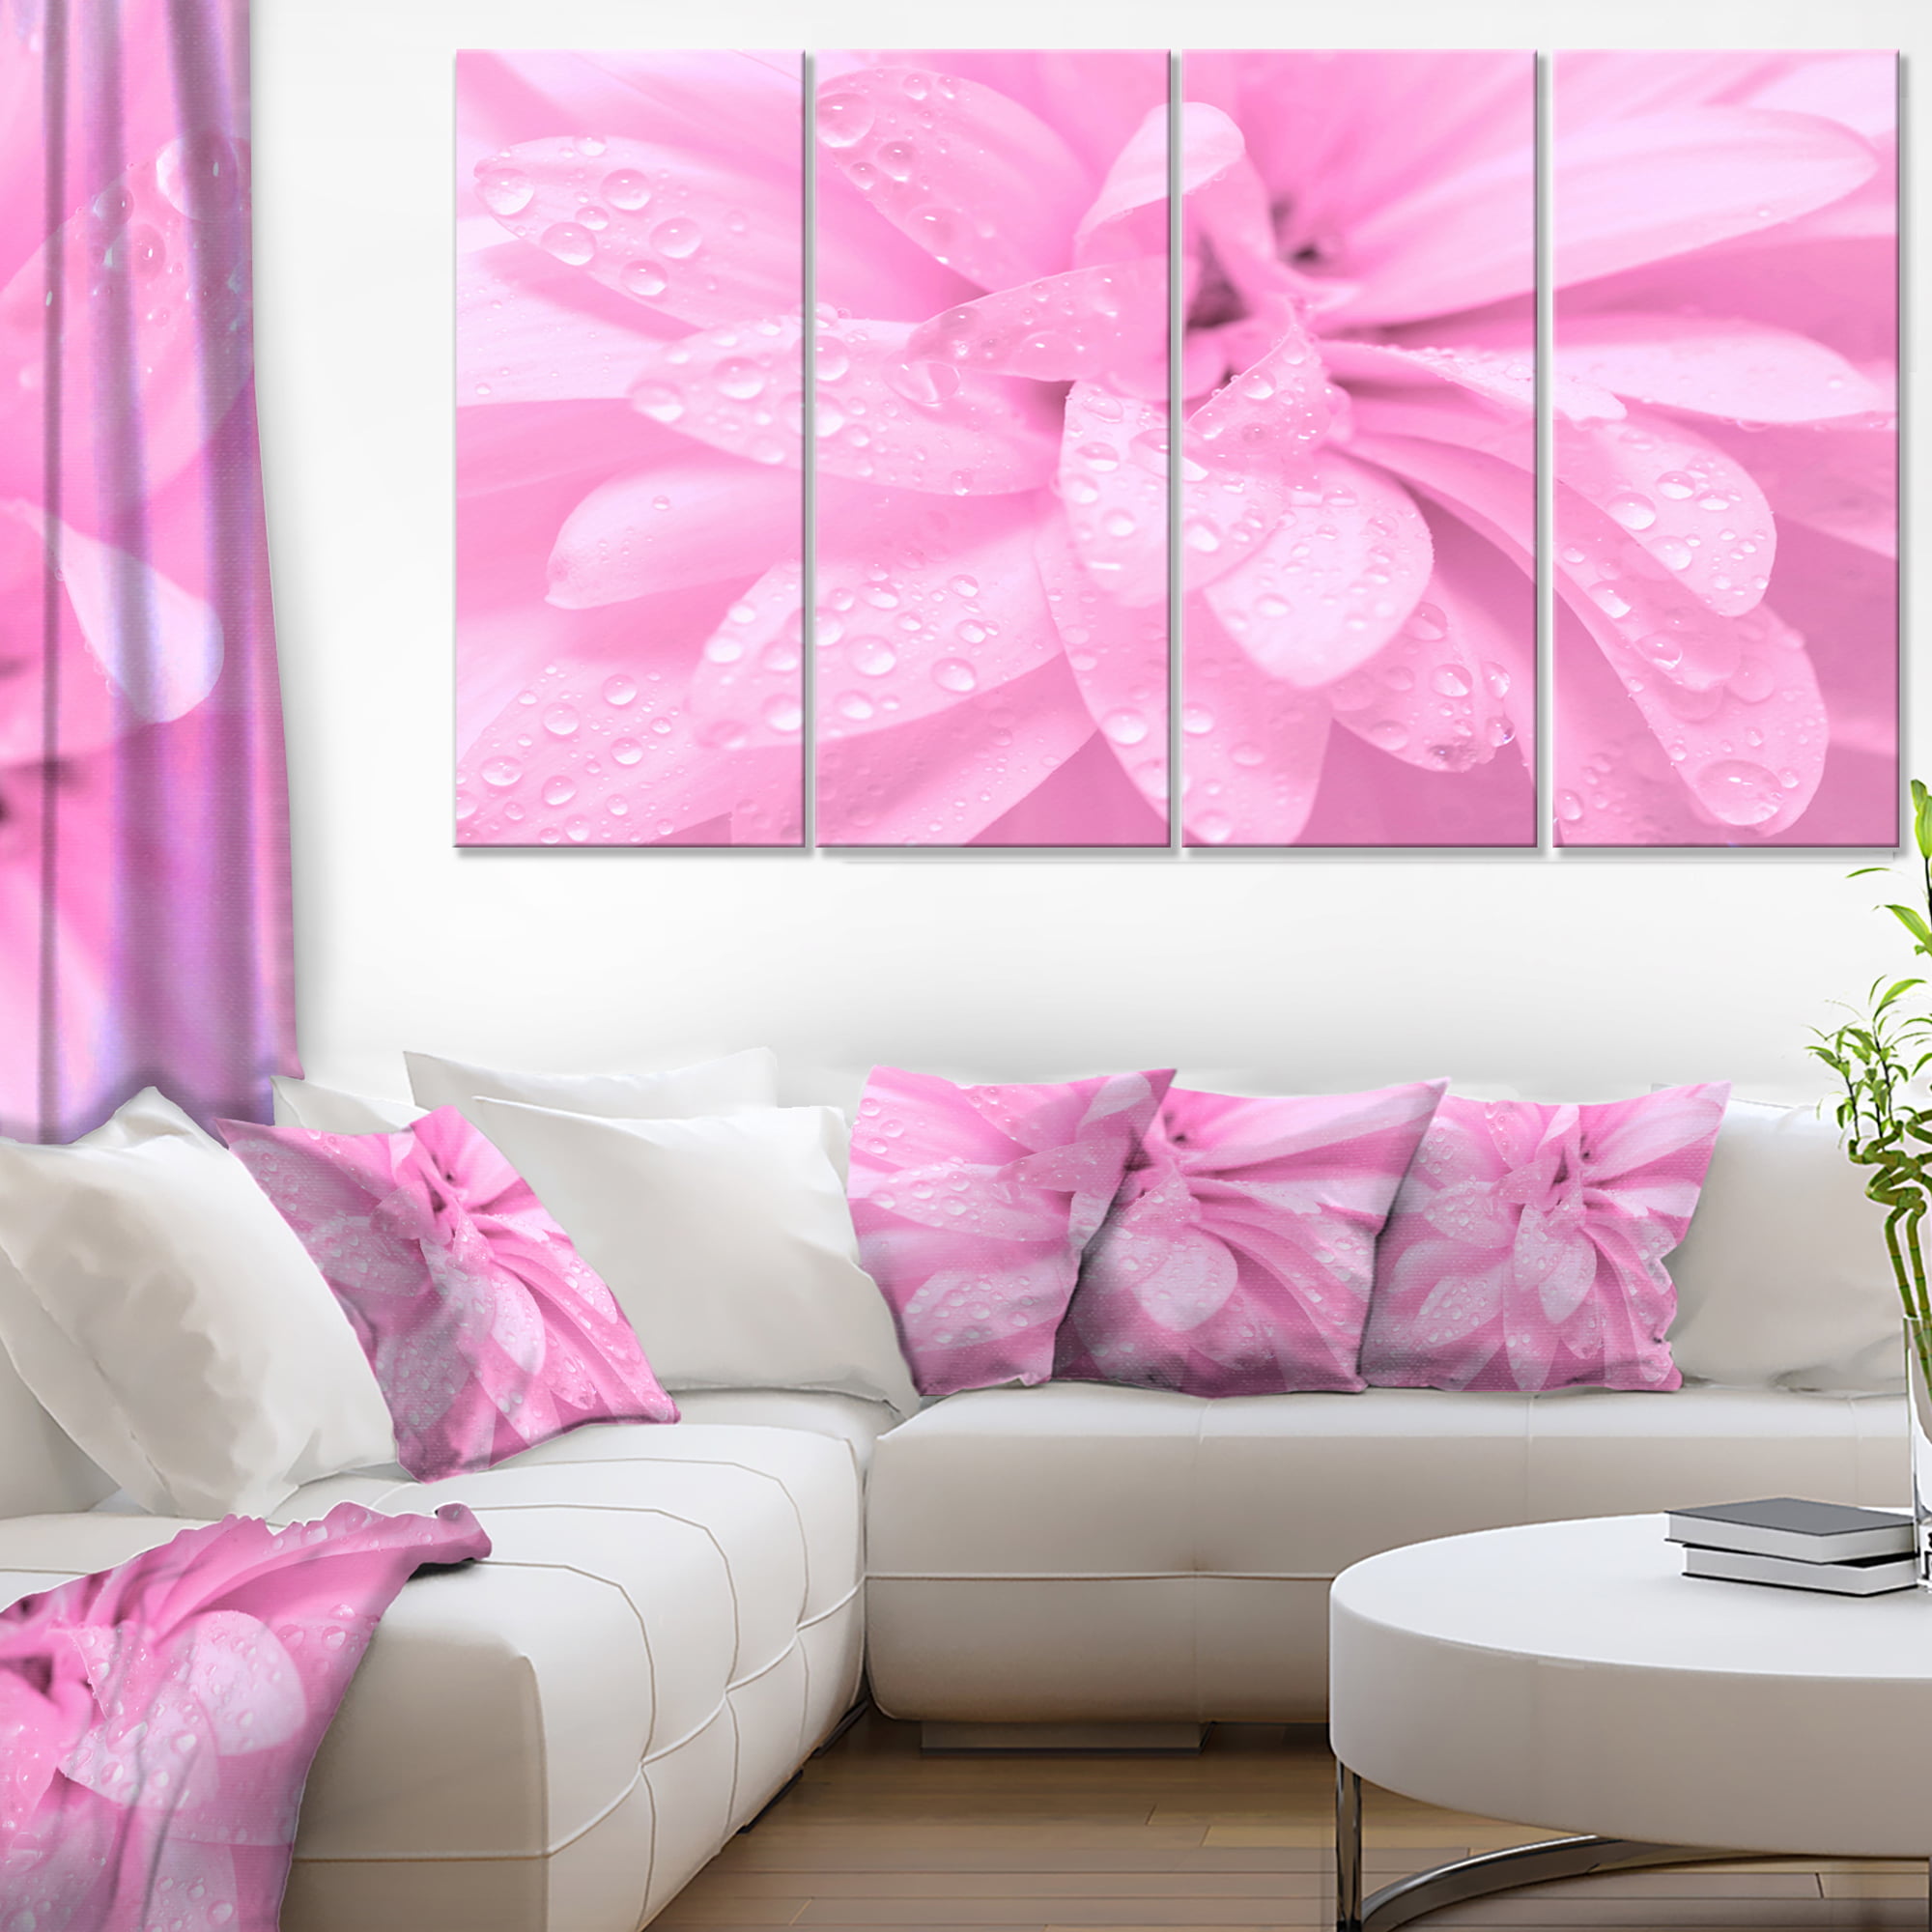 Abstract Pink Flower with Petals - Floral Canvas Art Print | Walmart Canada